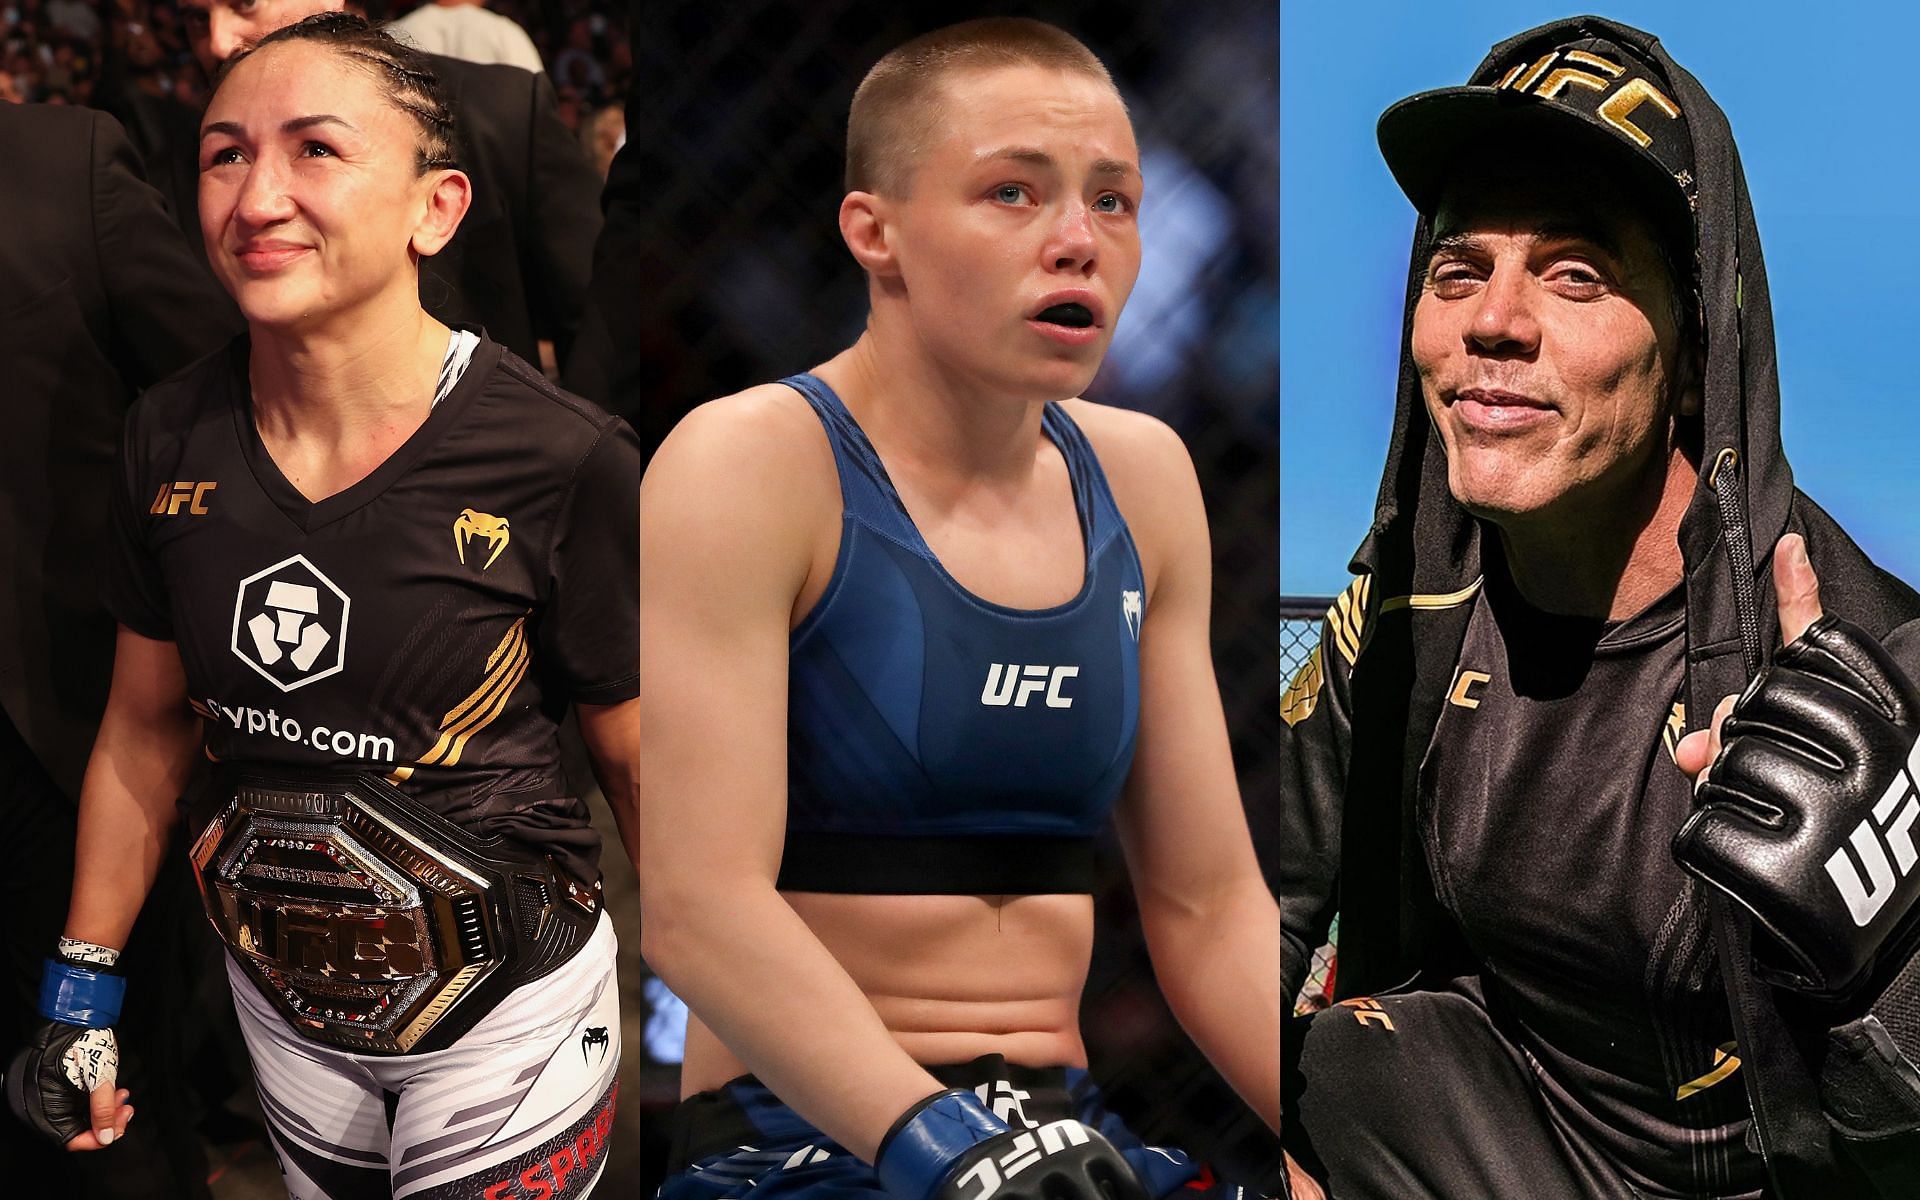 Carla Esparza and Rose Namajunas (left and center, images courtesy of Getty); Steve-O (right, image courtesy of @steveo Instagram)